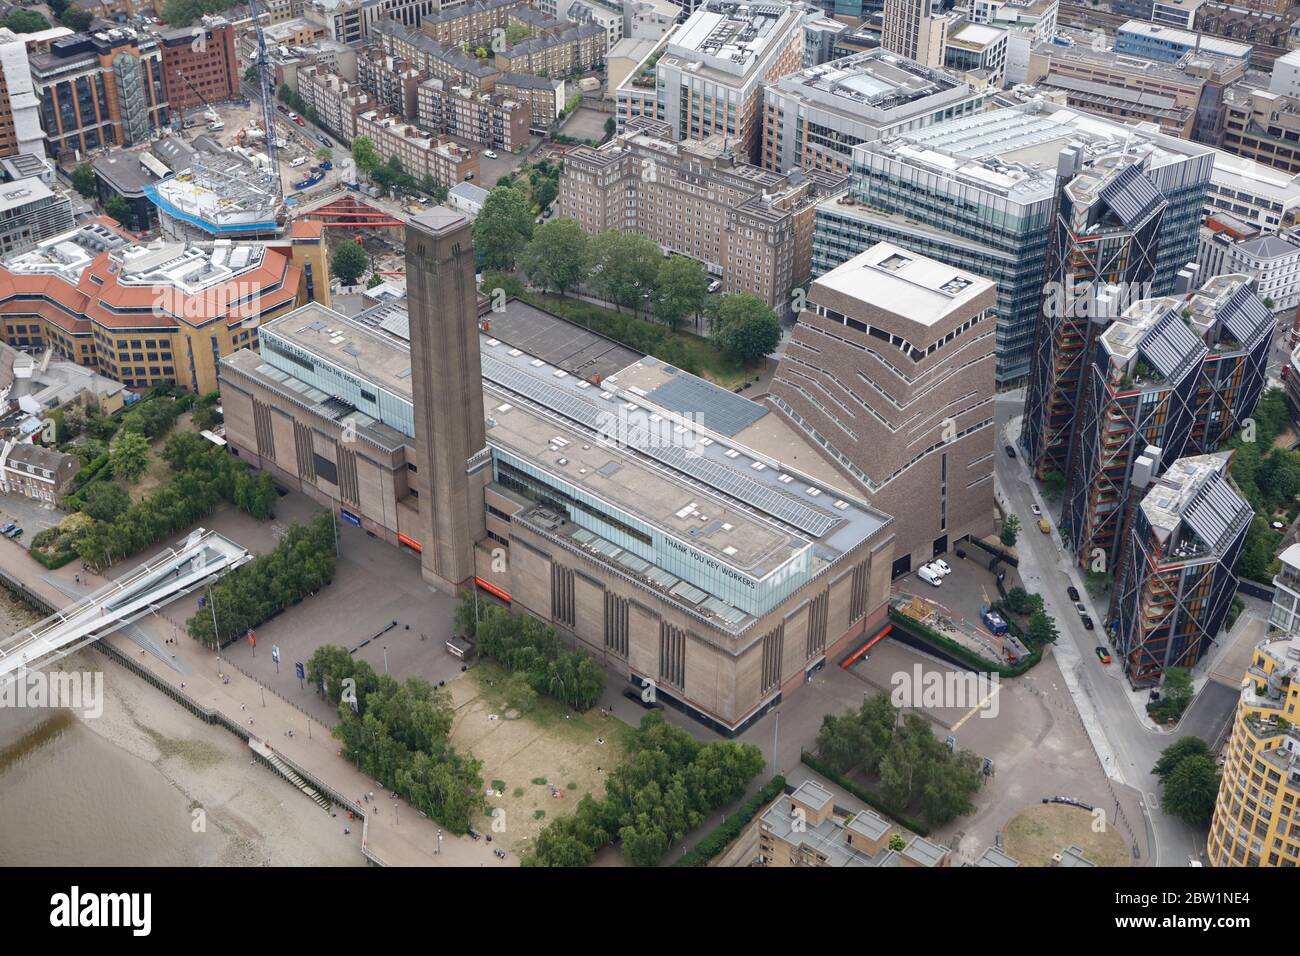 Aerial View of the Tate Modern International Gallery, London, UK Stock Photo